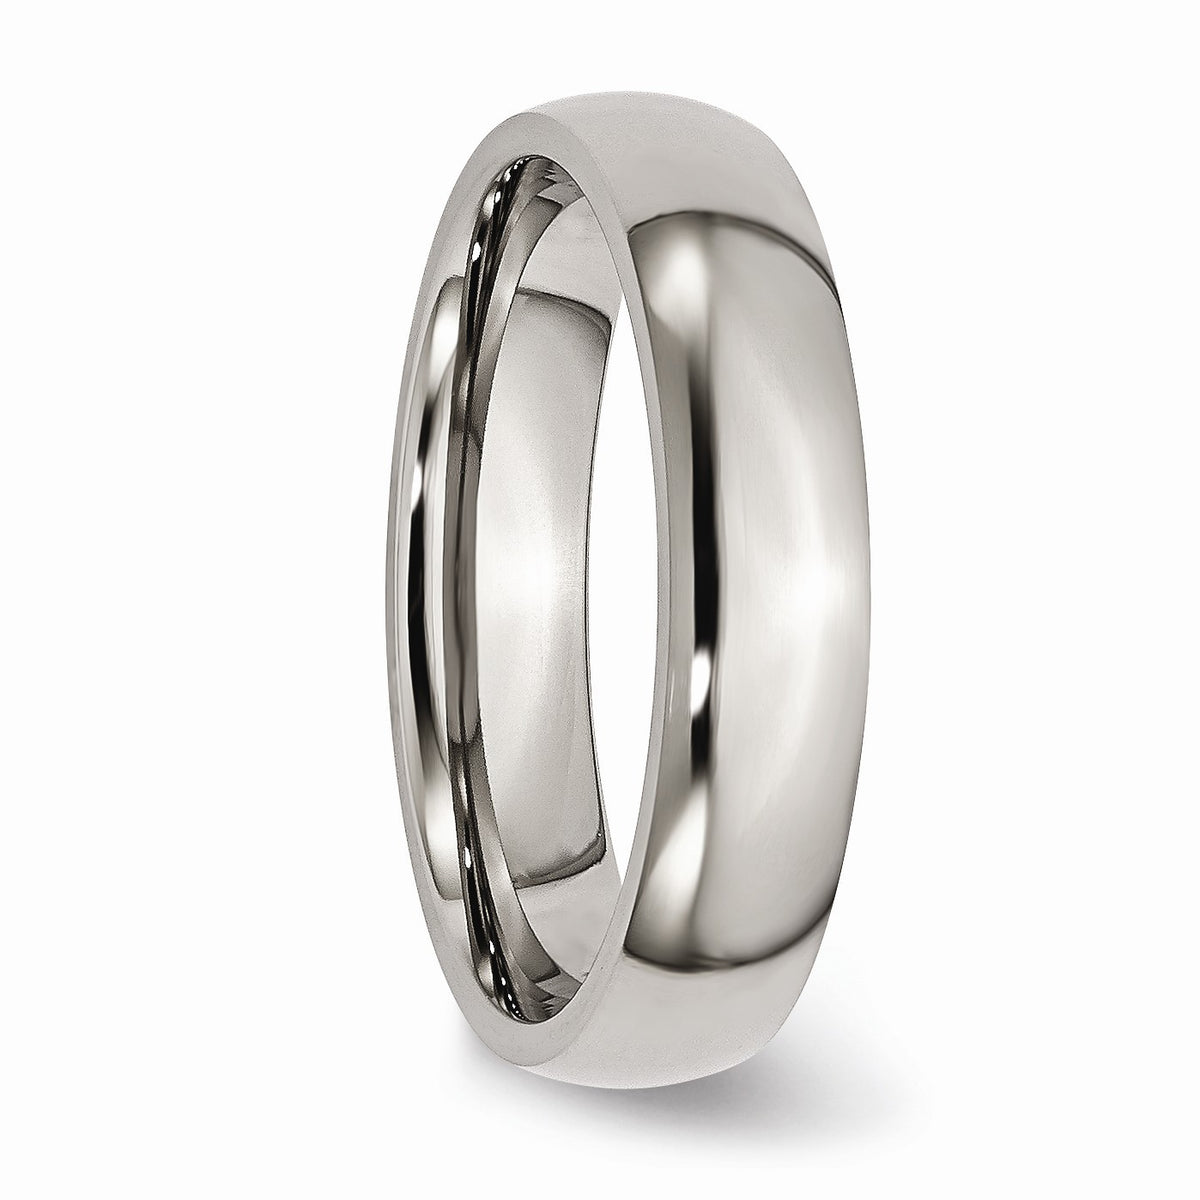 Alternate view of the Titanium 5mm Polished Domed Comfort Fit Band by The Black Bow Jewelry Co.